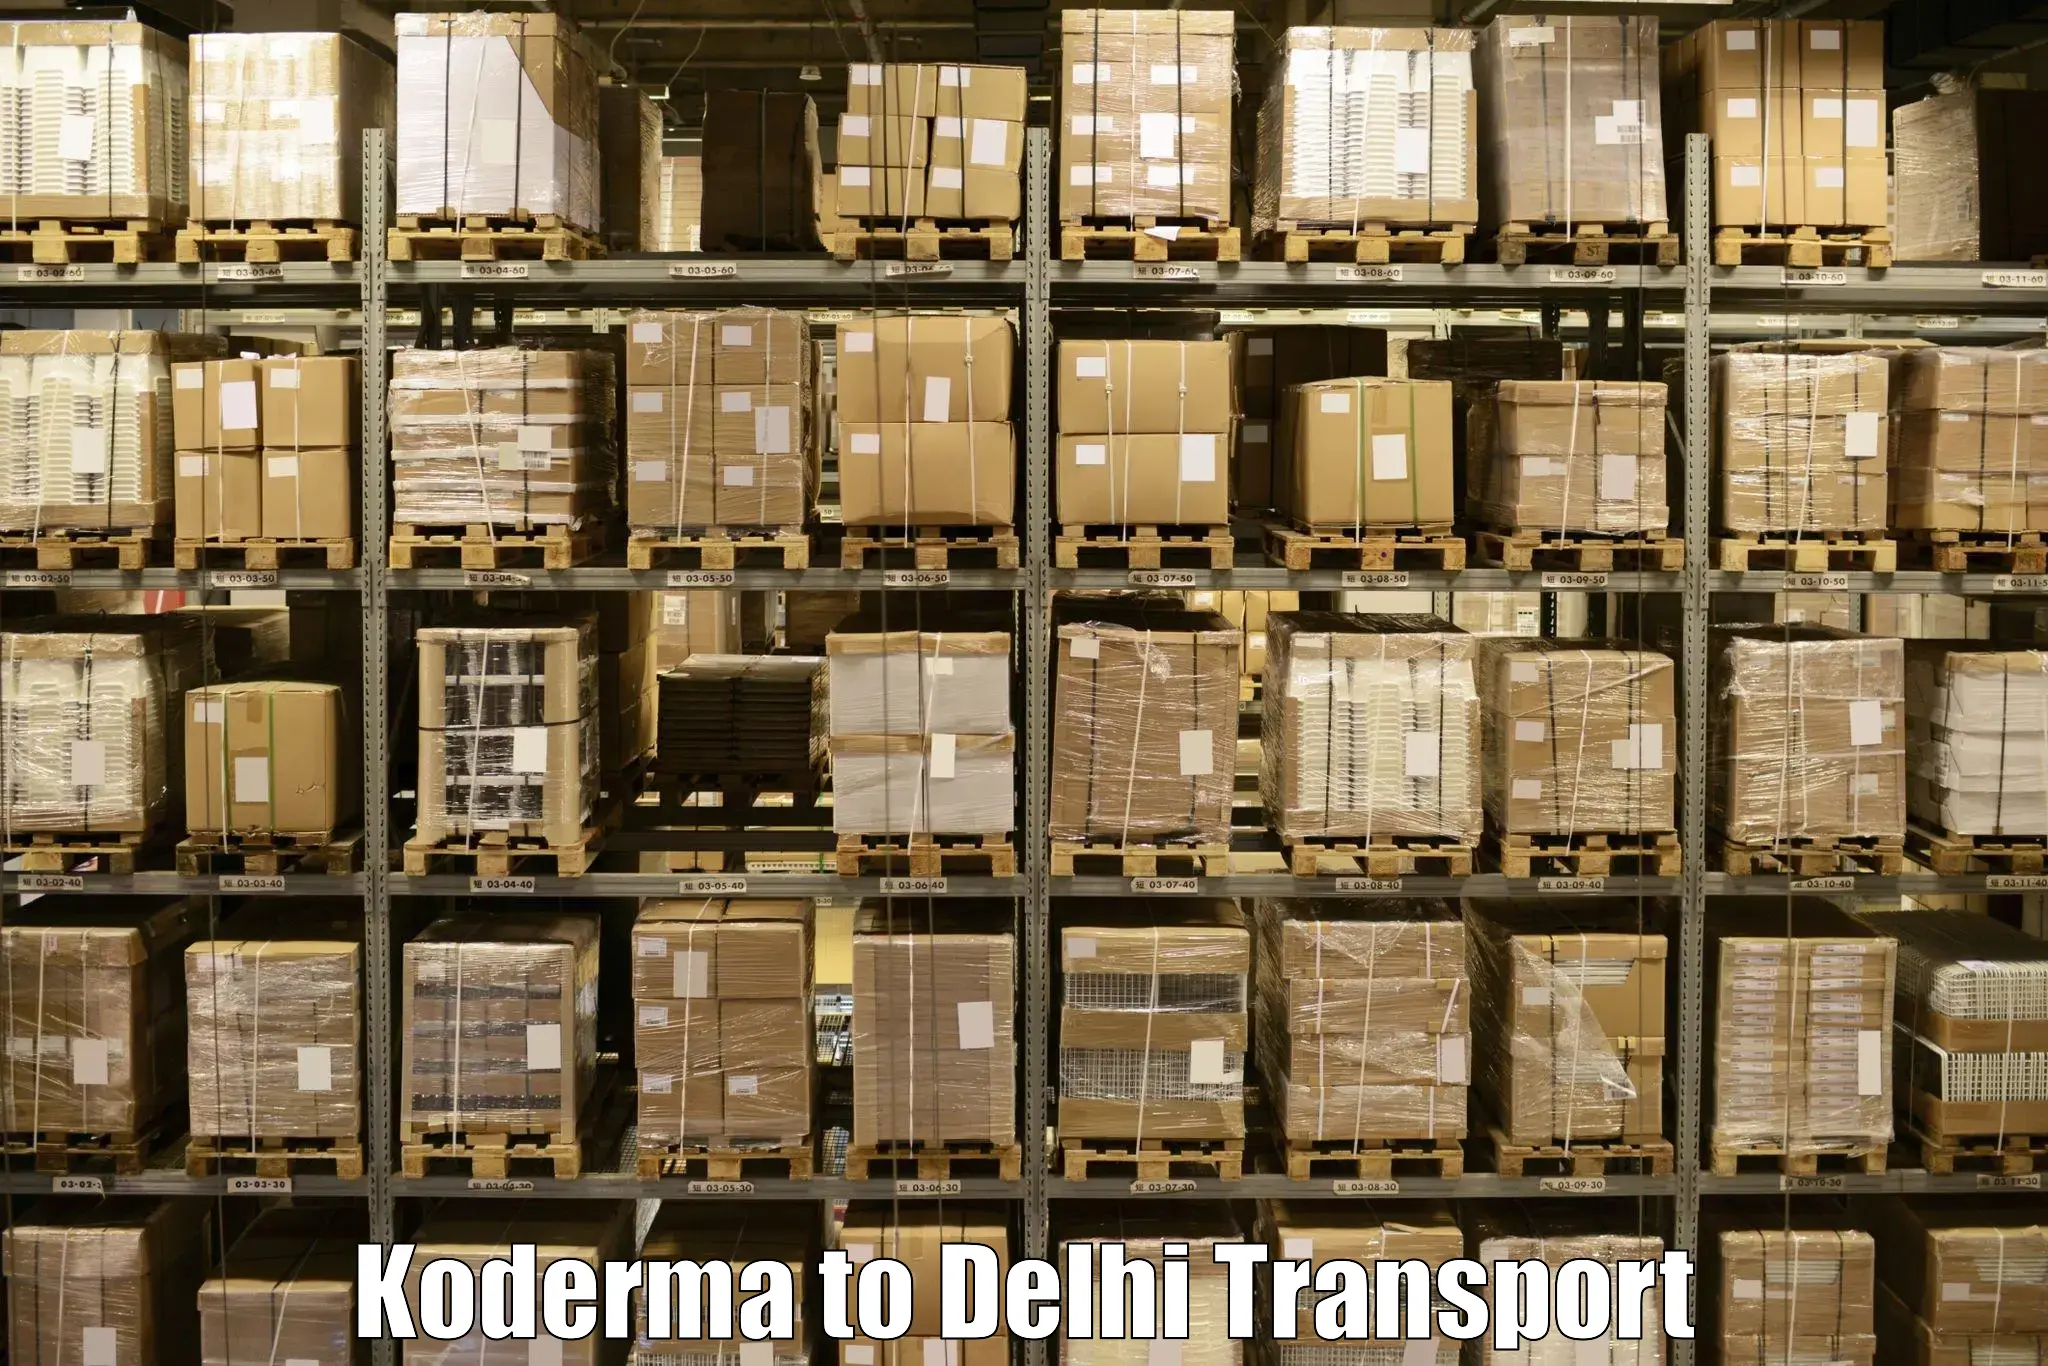 Transport bike from one state to another Koderma to Delhi